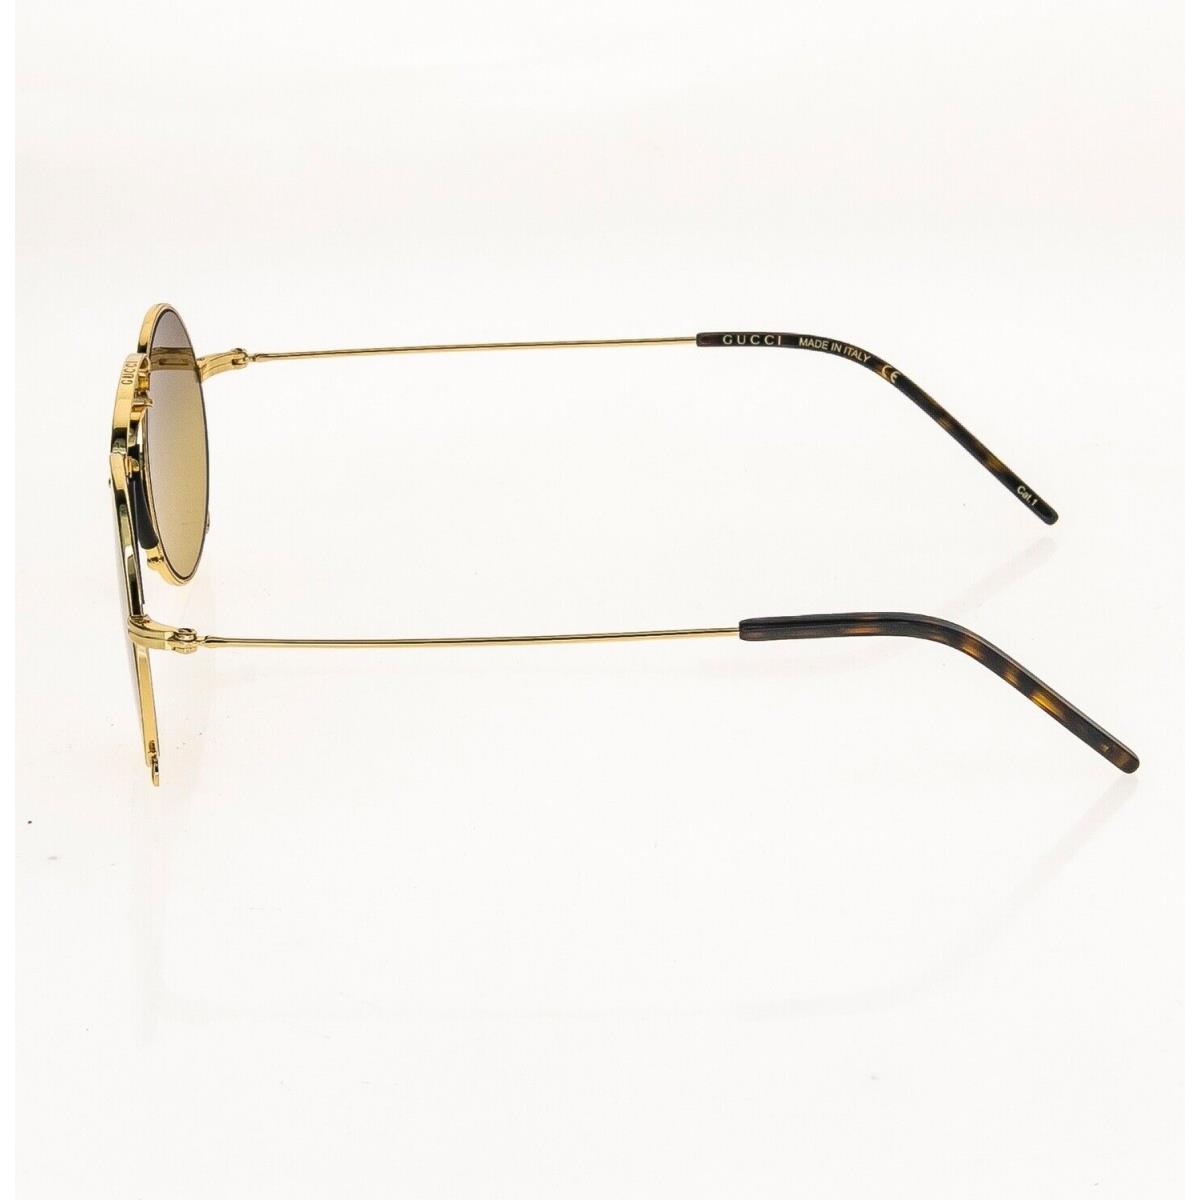 Gucci sunglasses  - 003 , Gold Frame, Brown Lens 2